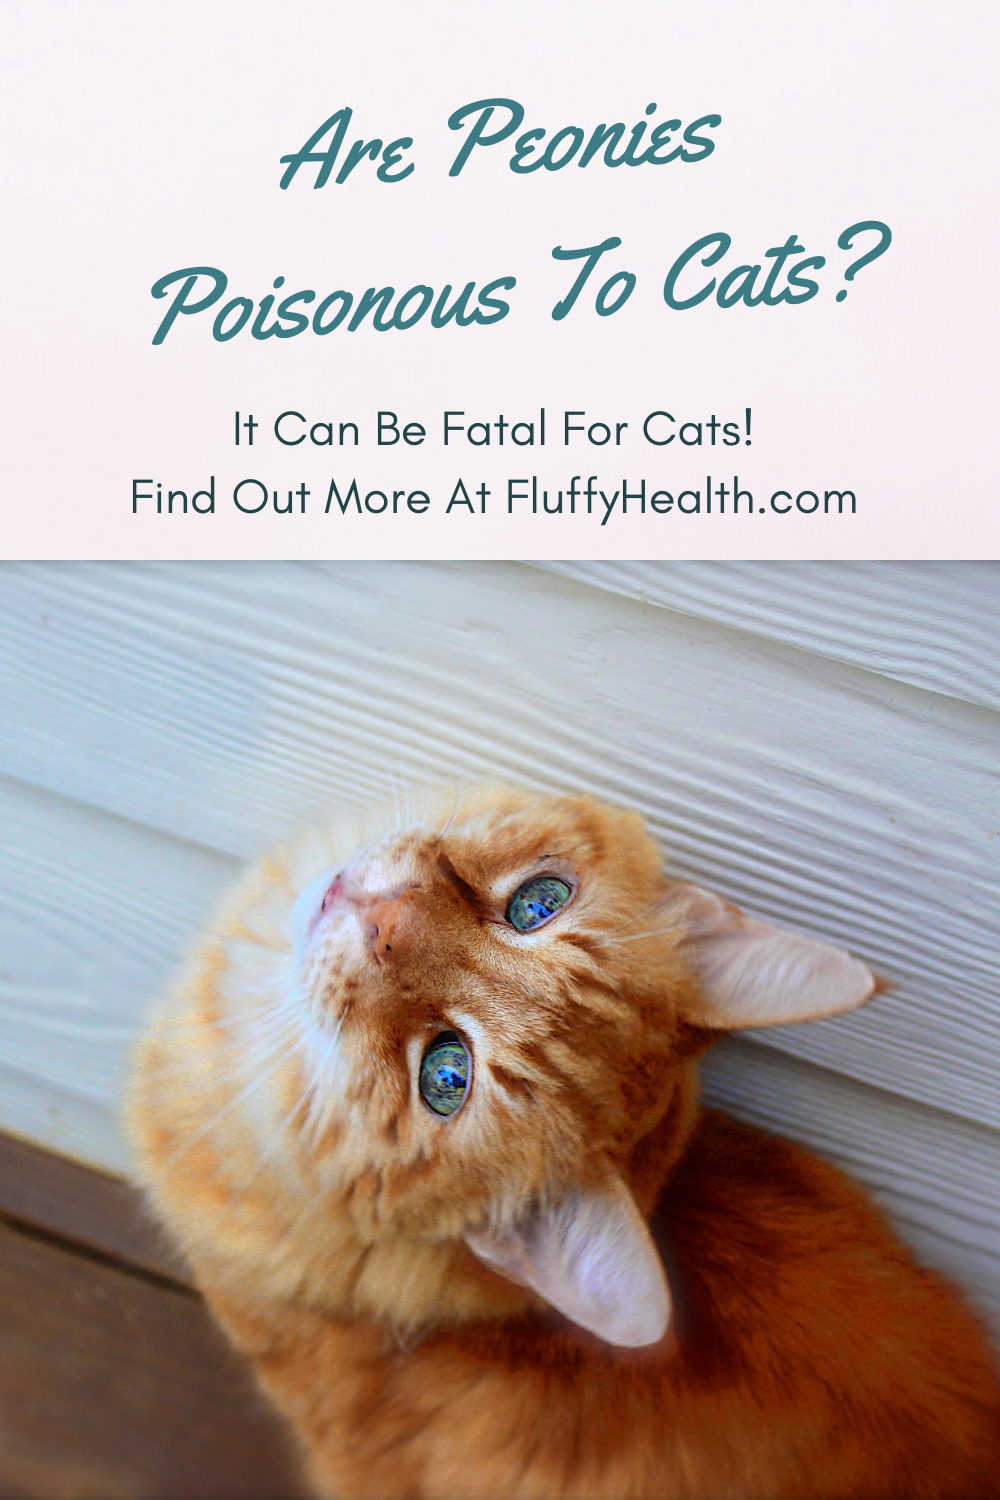 are-peonies-poisonous-to-cats